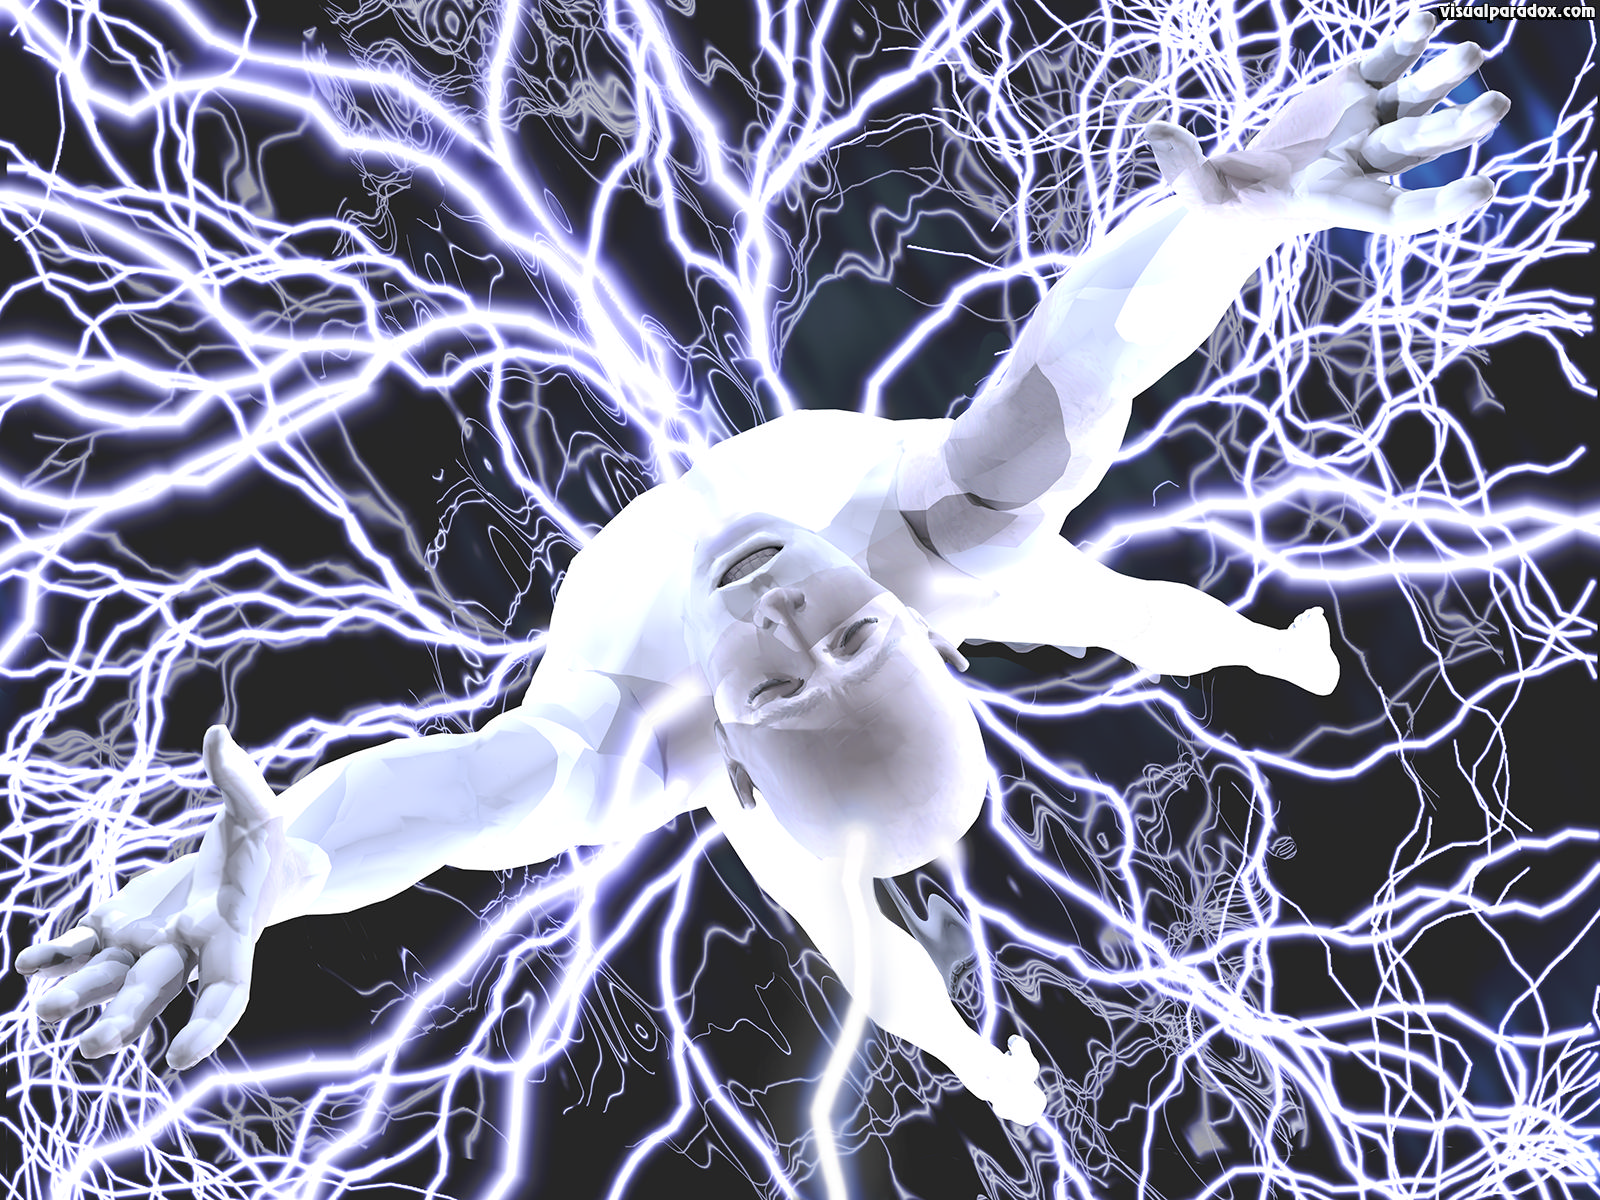 lightning, electricity, shock, charge, man, electrocution, bolts, 3d, wallpaper